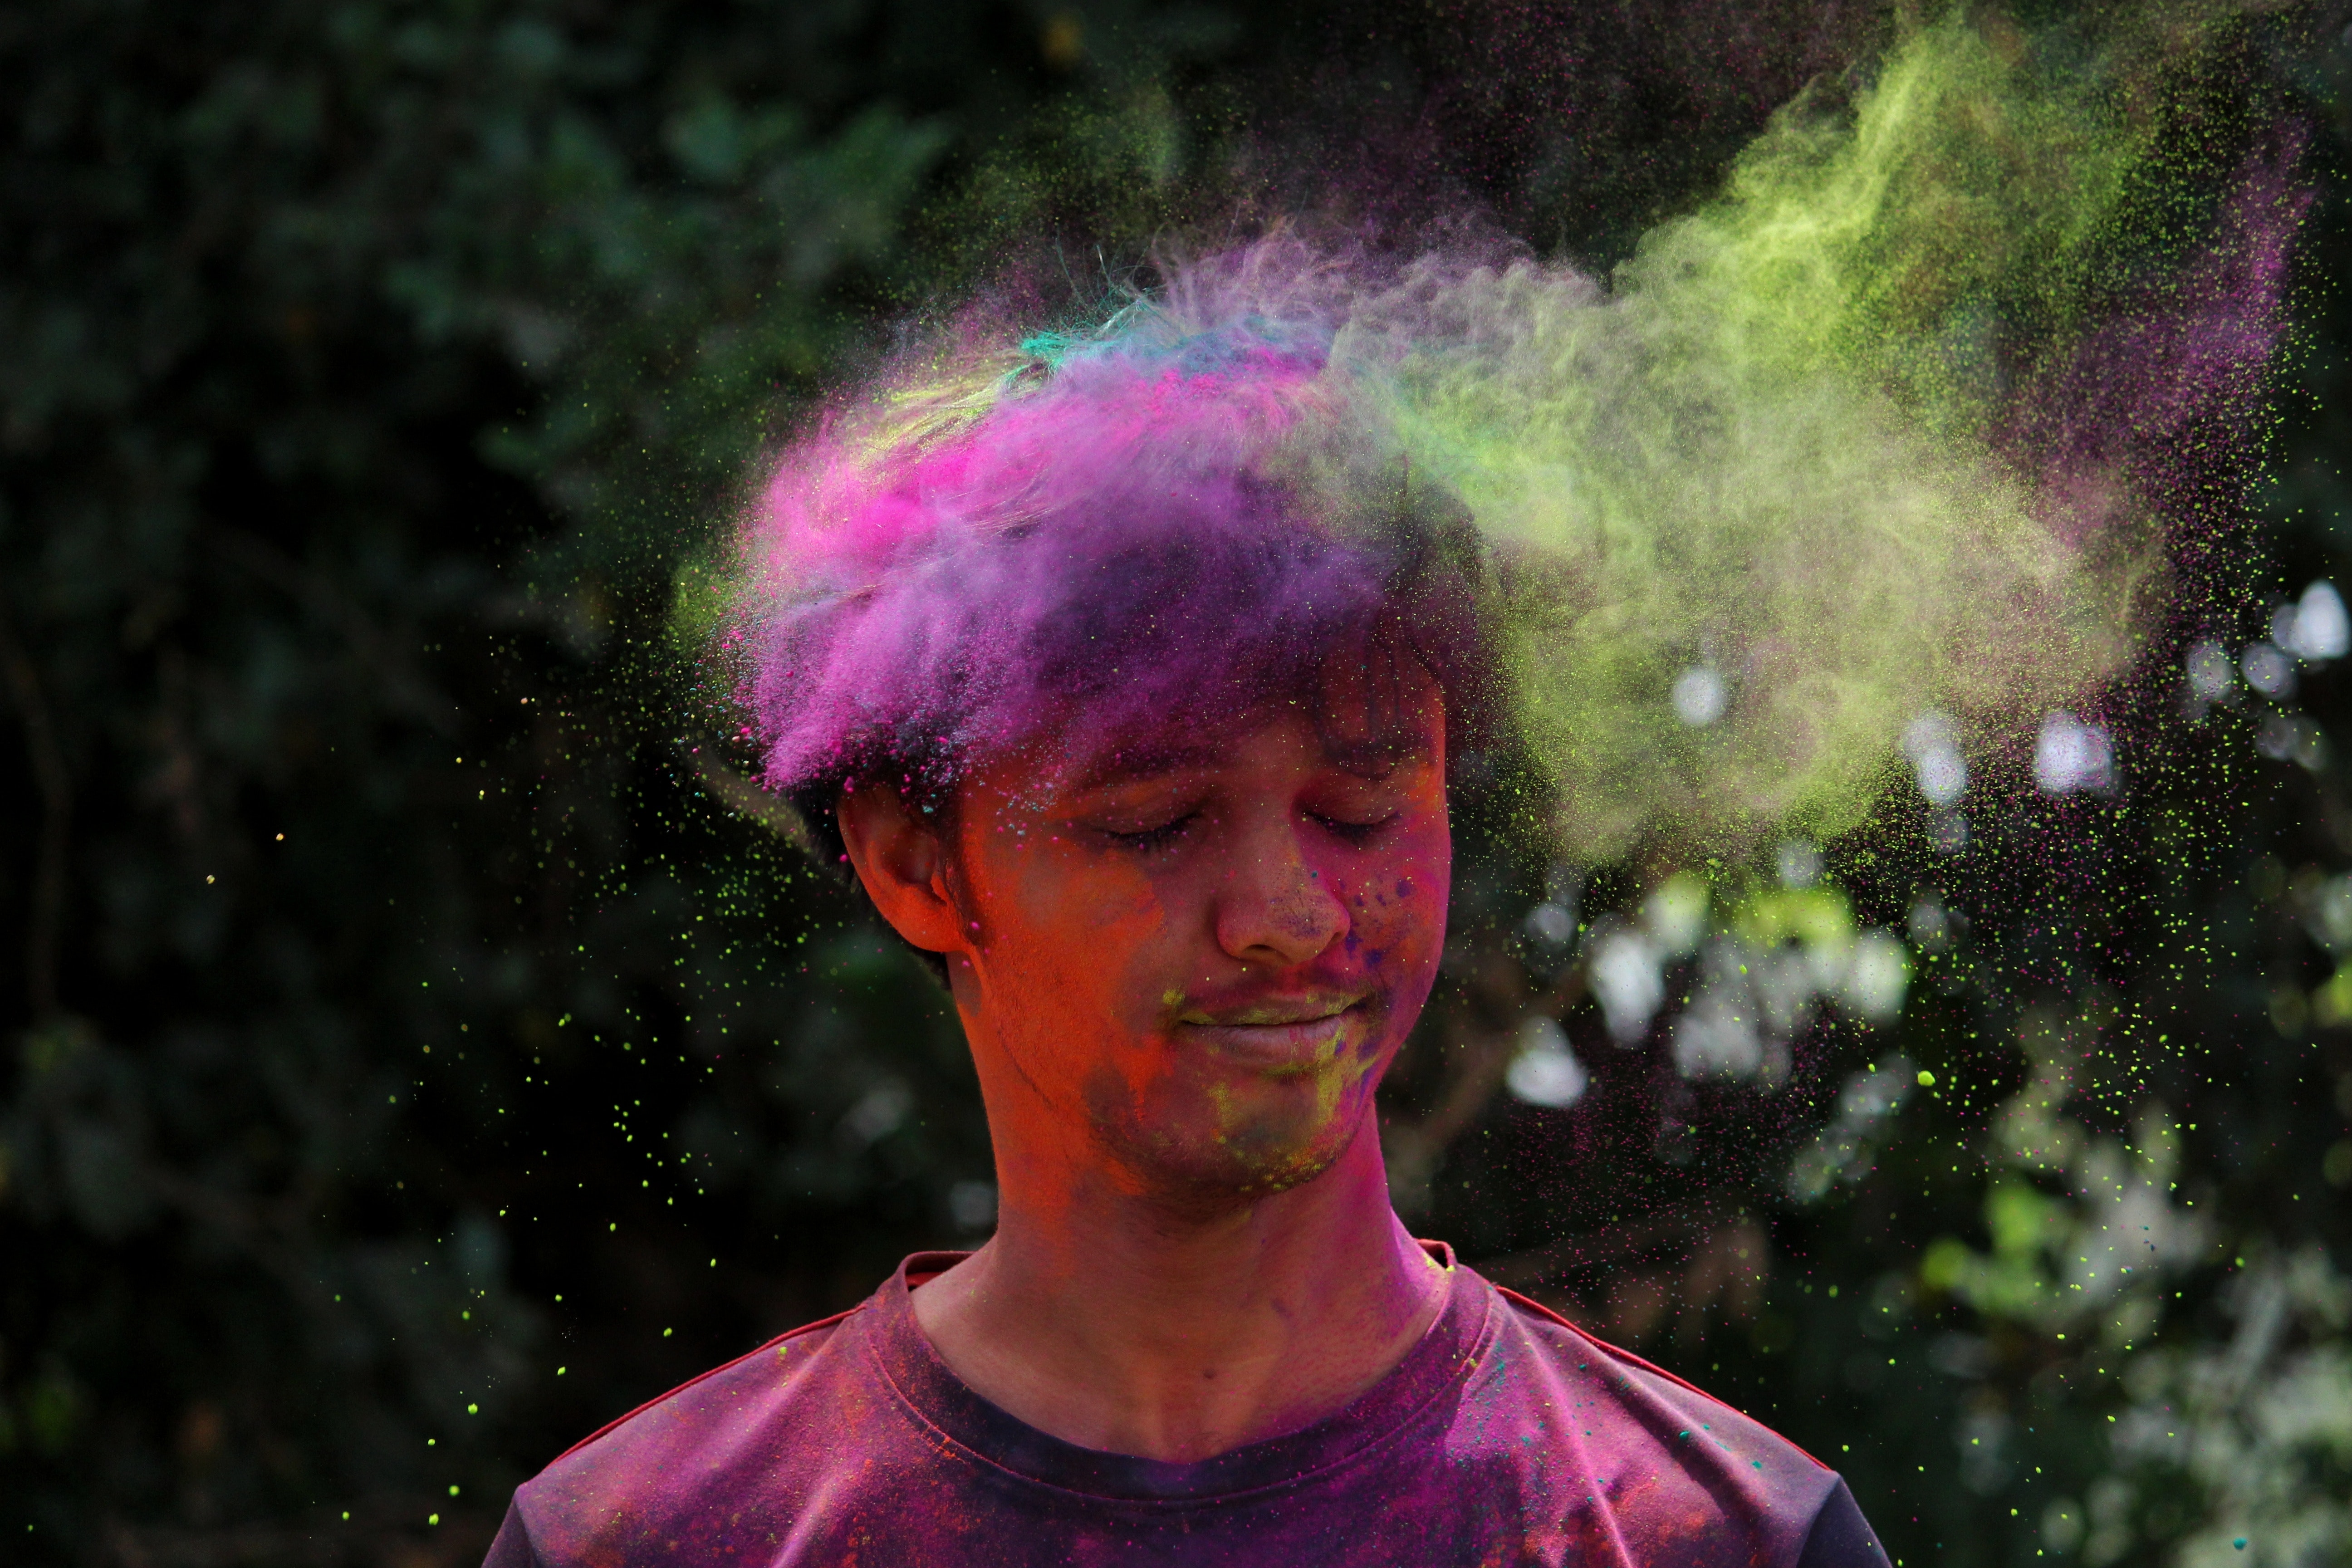 Man wearing pink crew-neck shirt with multicolored powder photo